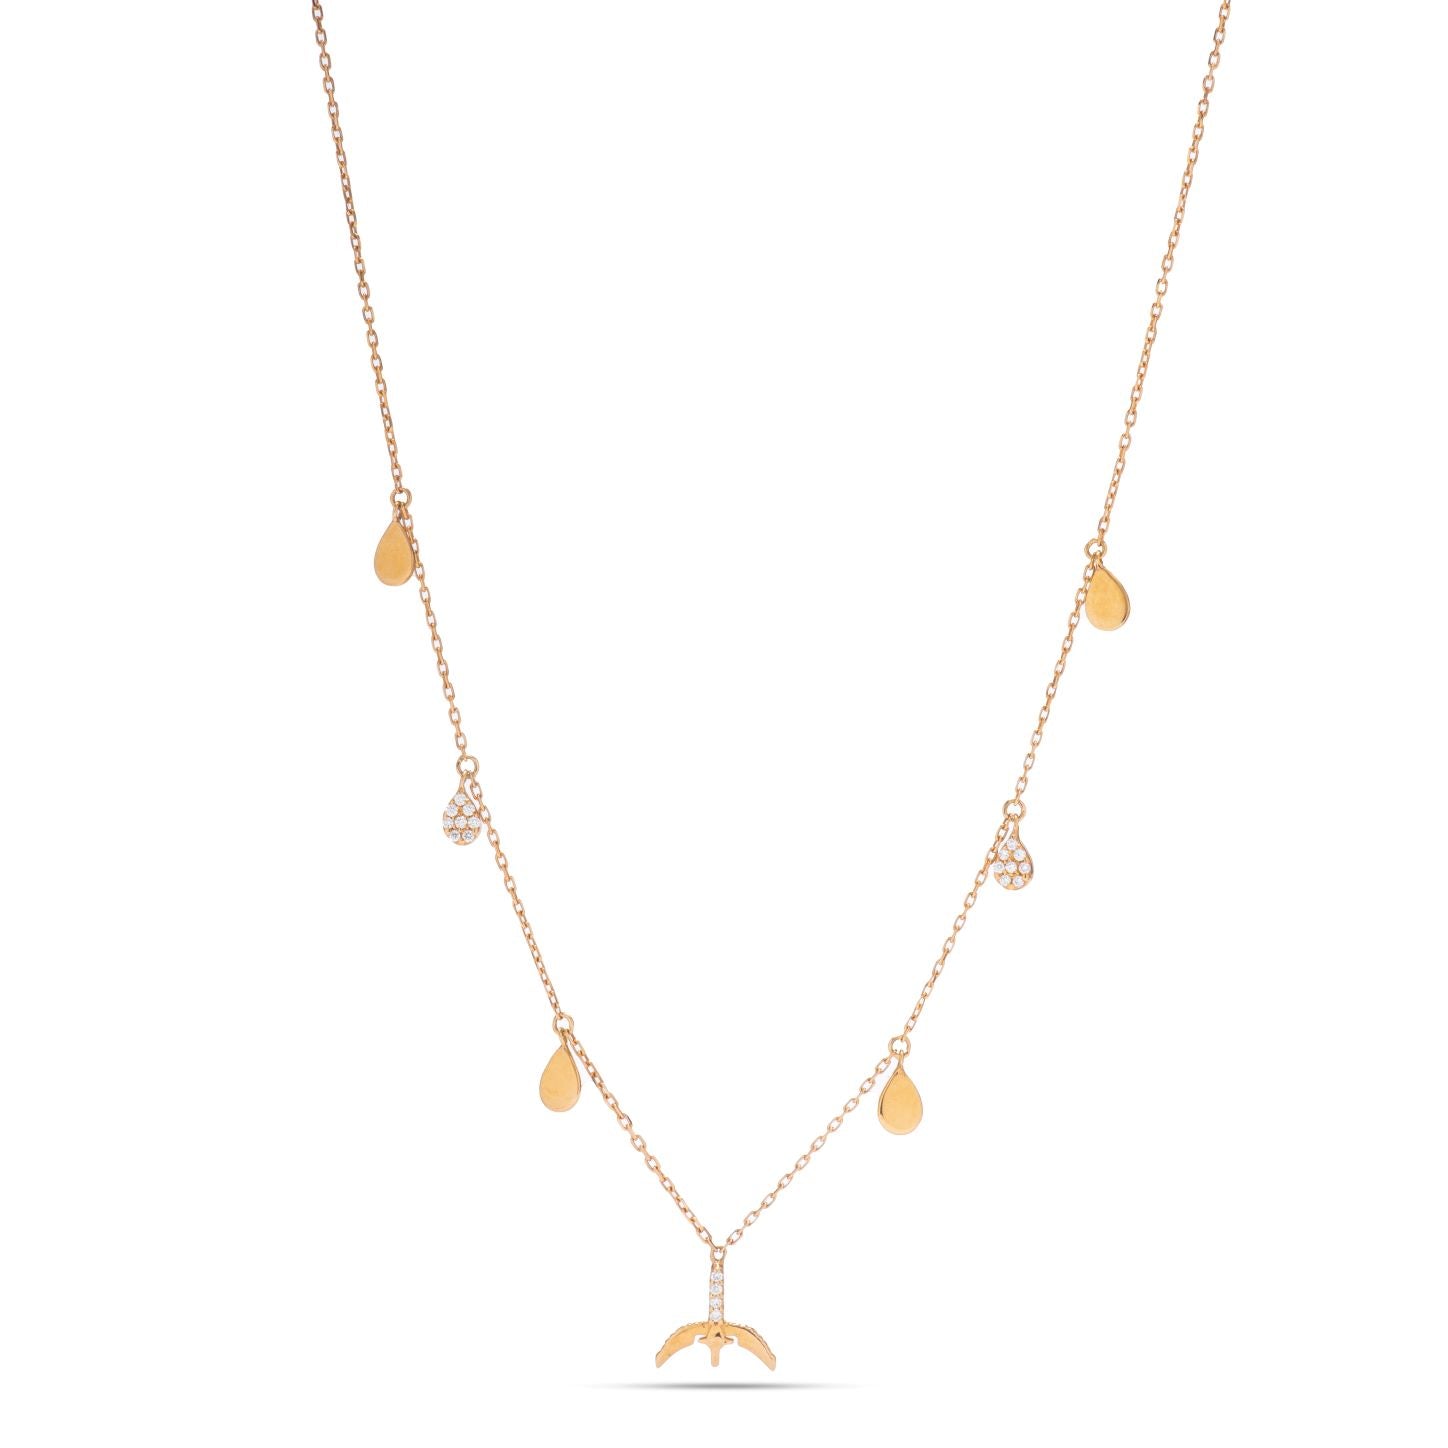 Diamond drops necklace in 18k Yellow gold - SIR1105